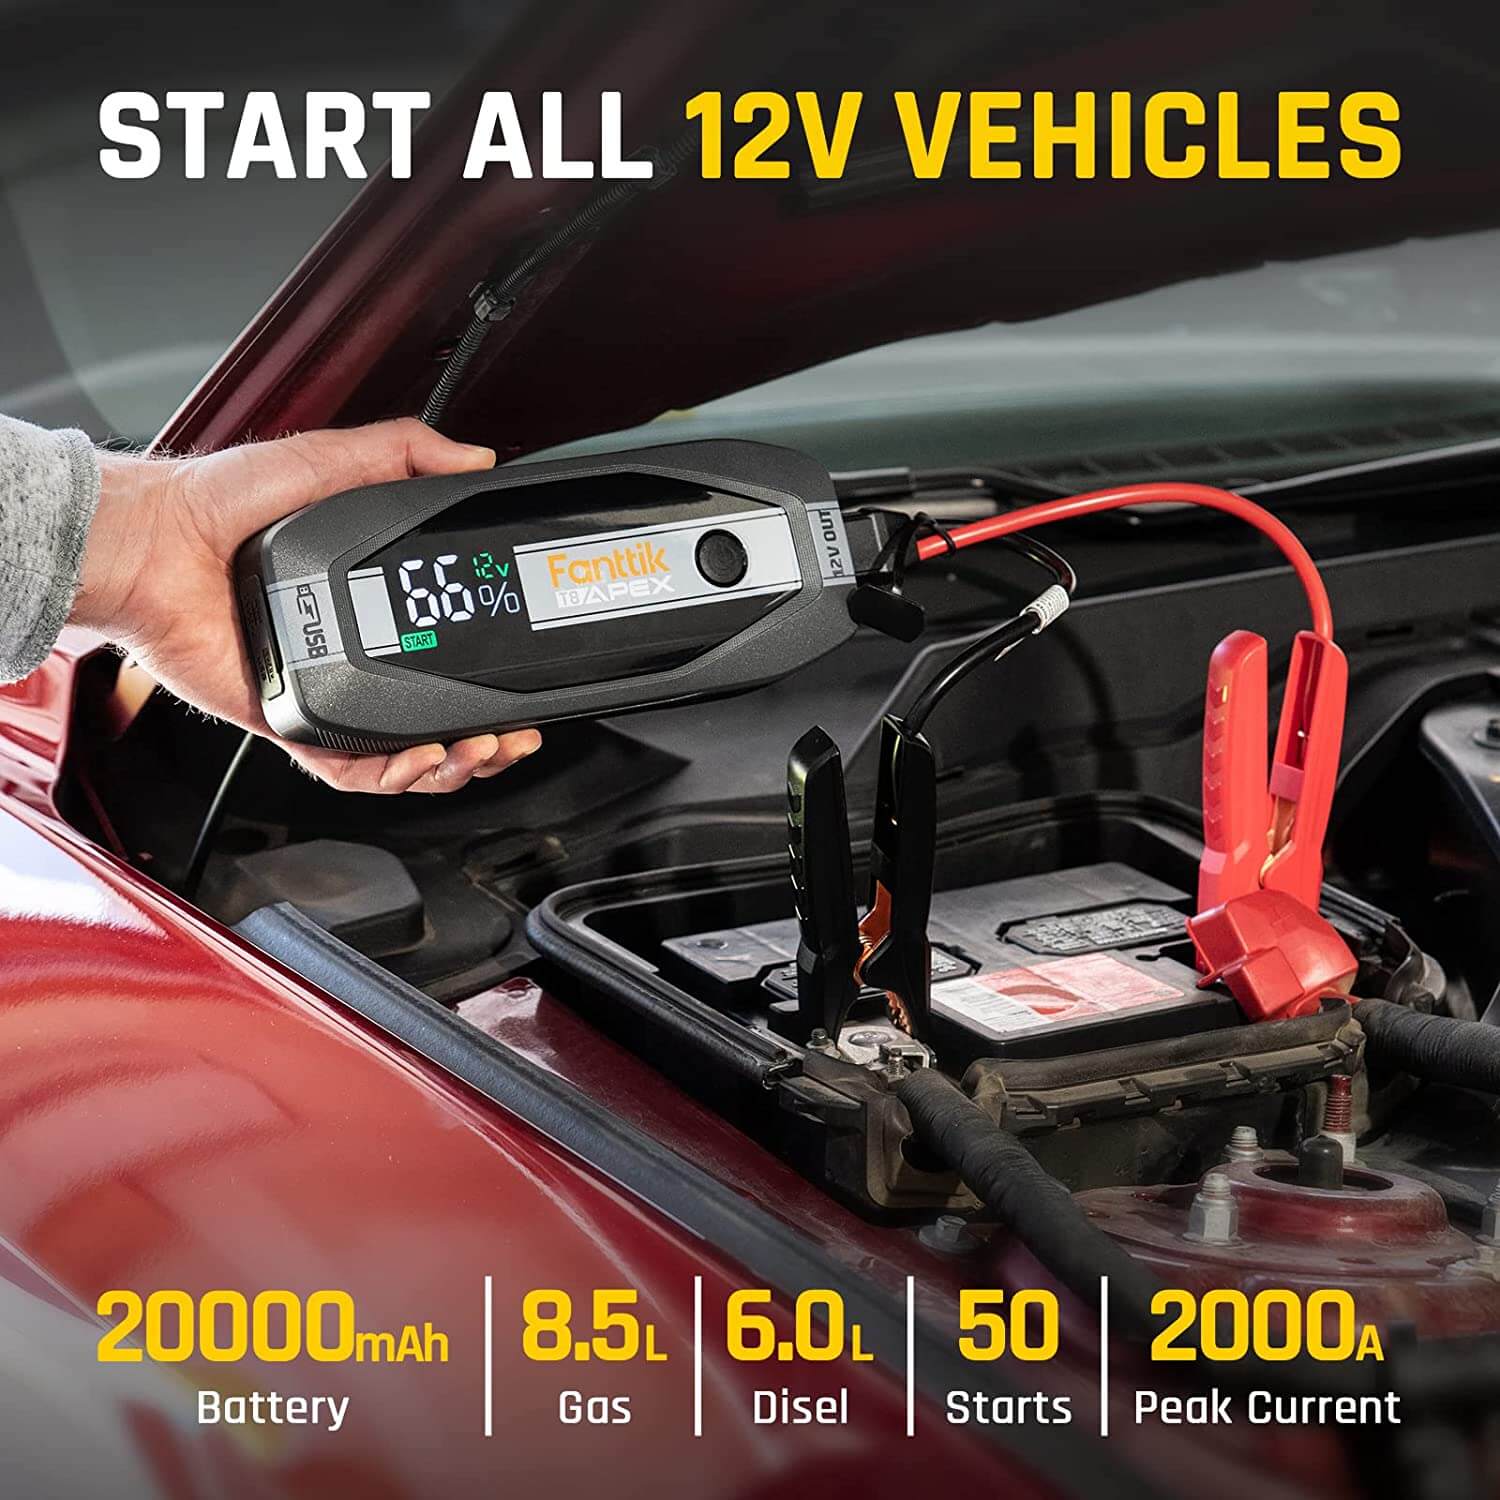 Fanttik T8 Apex 2000 Amp Jump Starter, 65W Two-Way Fast Charging, for Up to 8.5L Gas and 6L Diesel Engines (65w Charger Included)